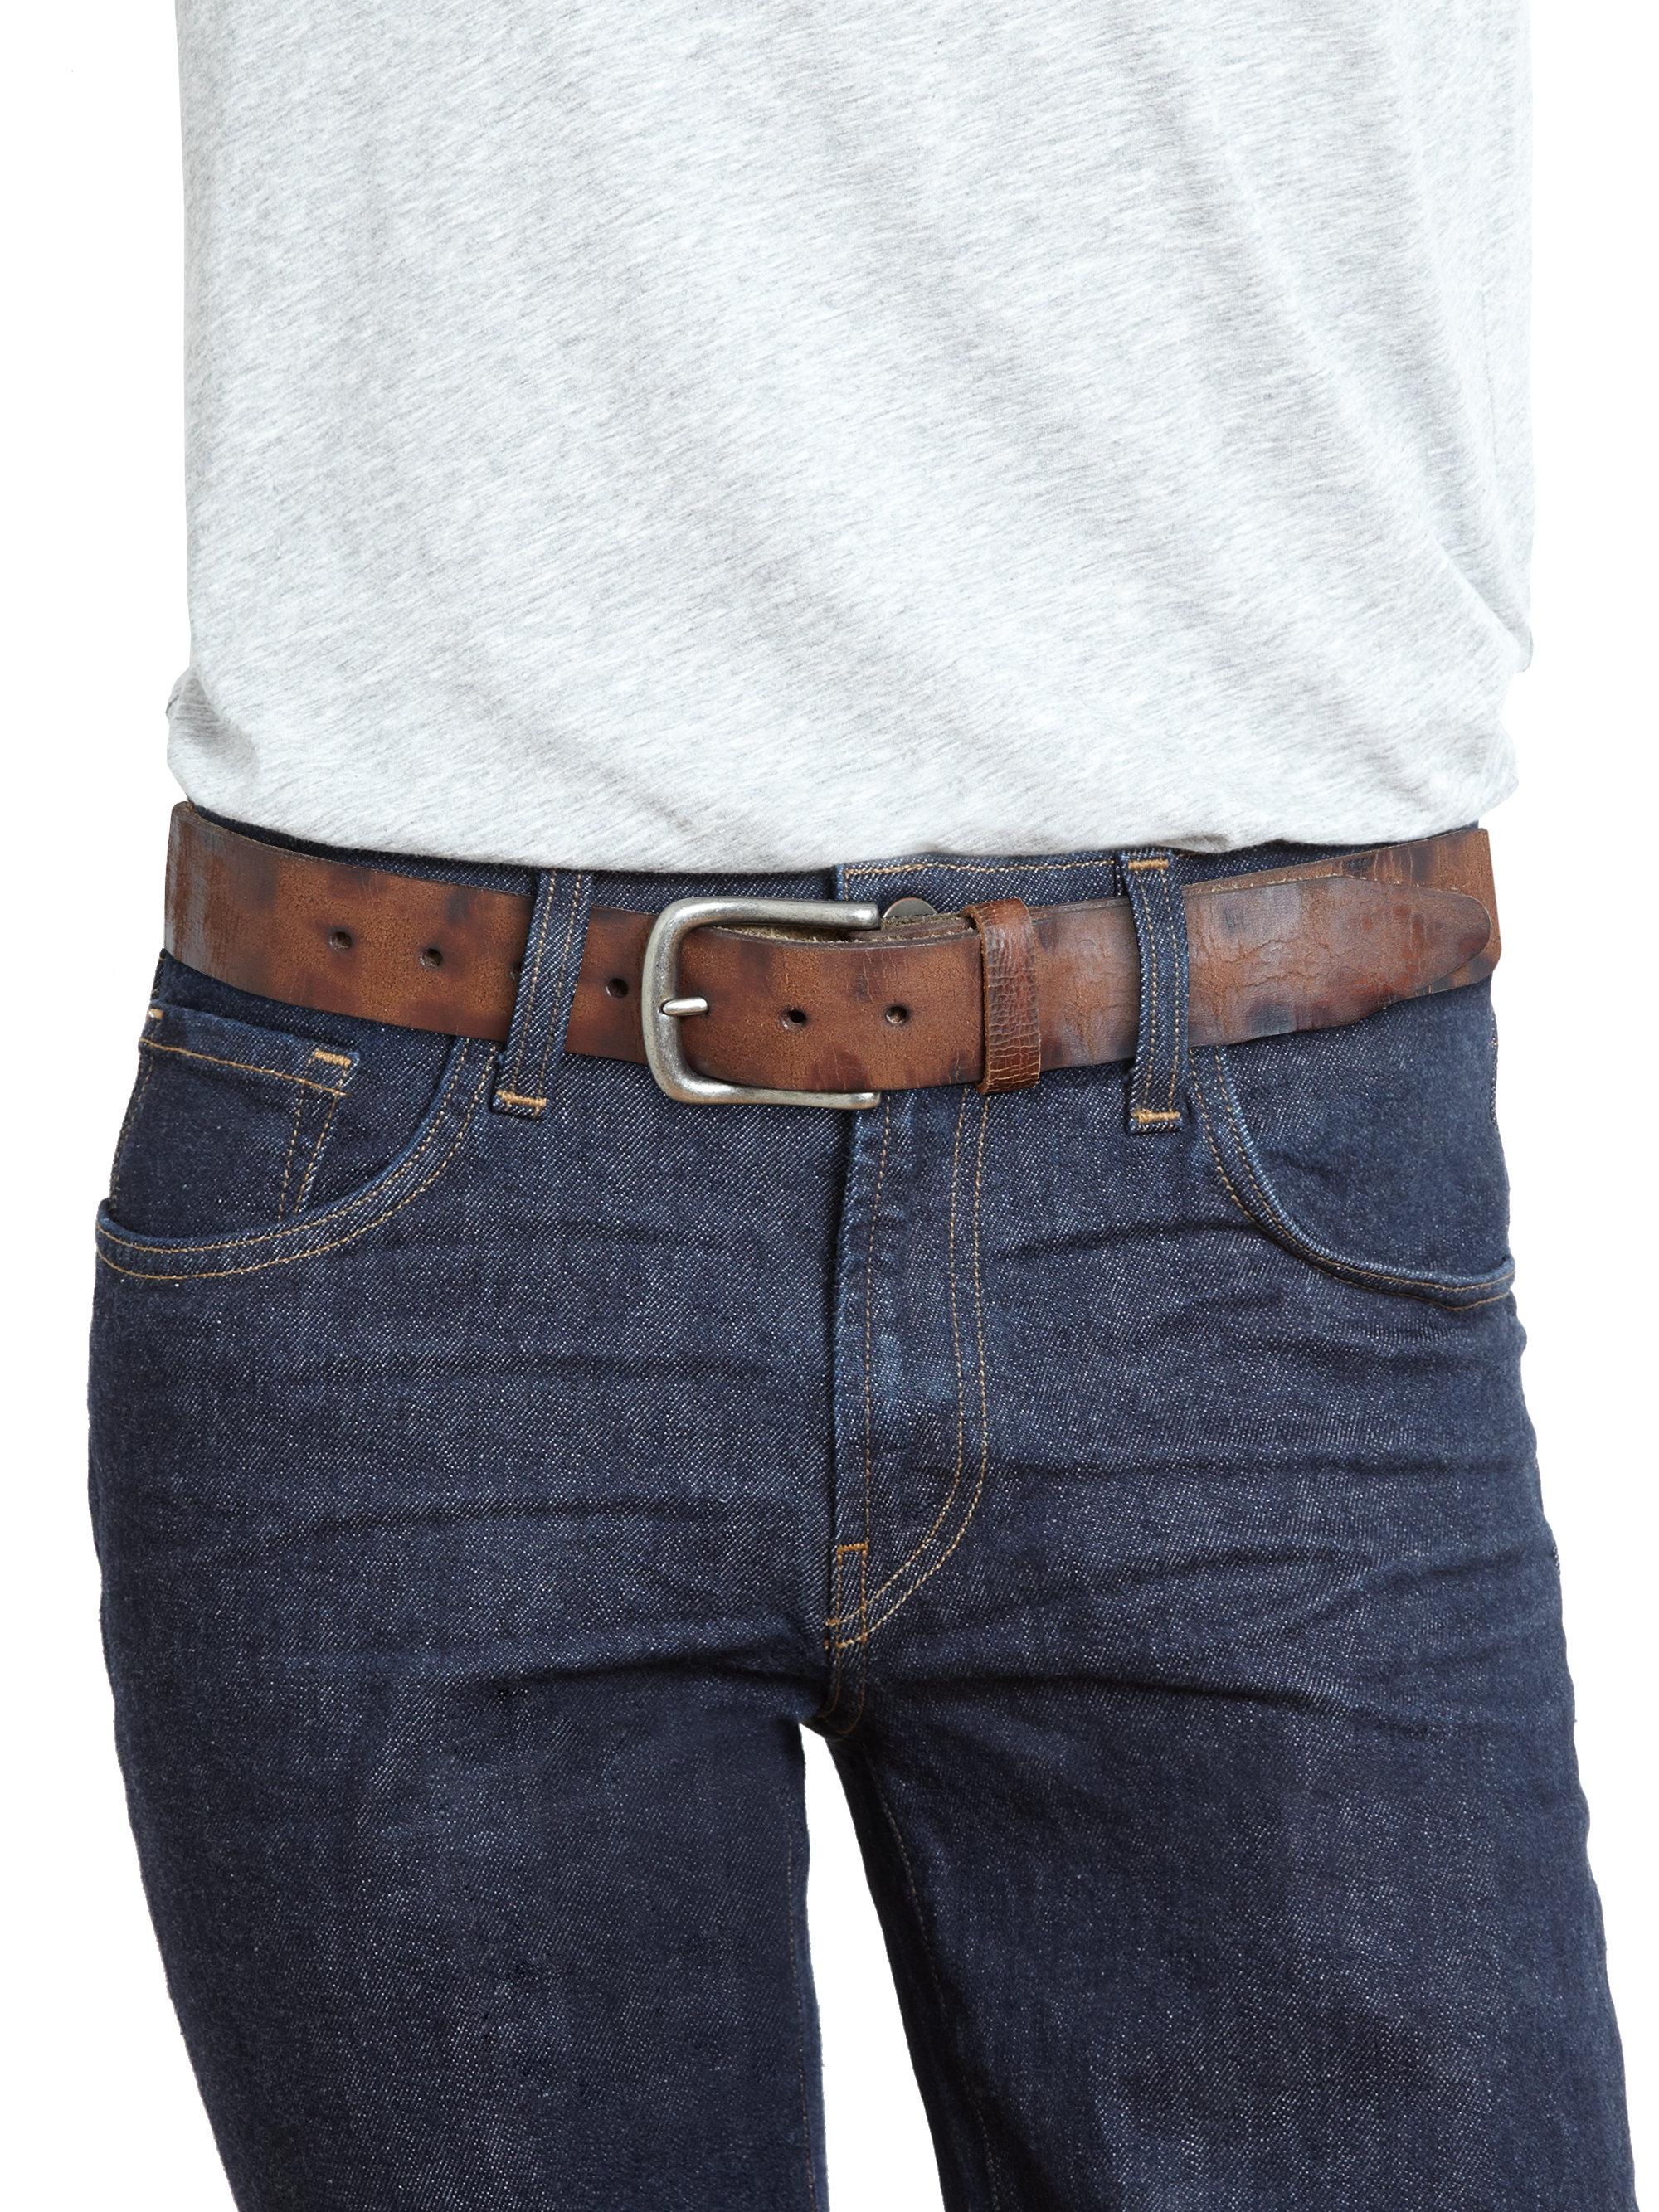 Lyst - Leather Island By Bill Lavin Distressed Leather Belt in Brown ...